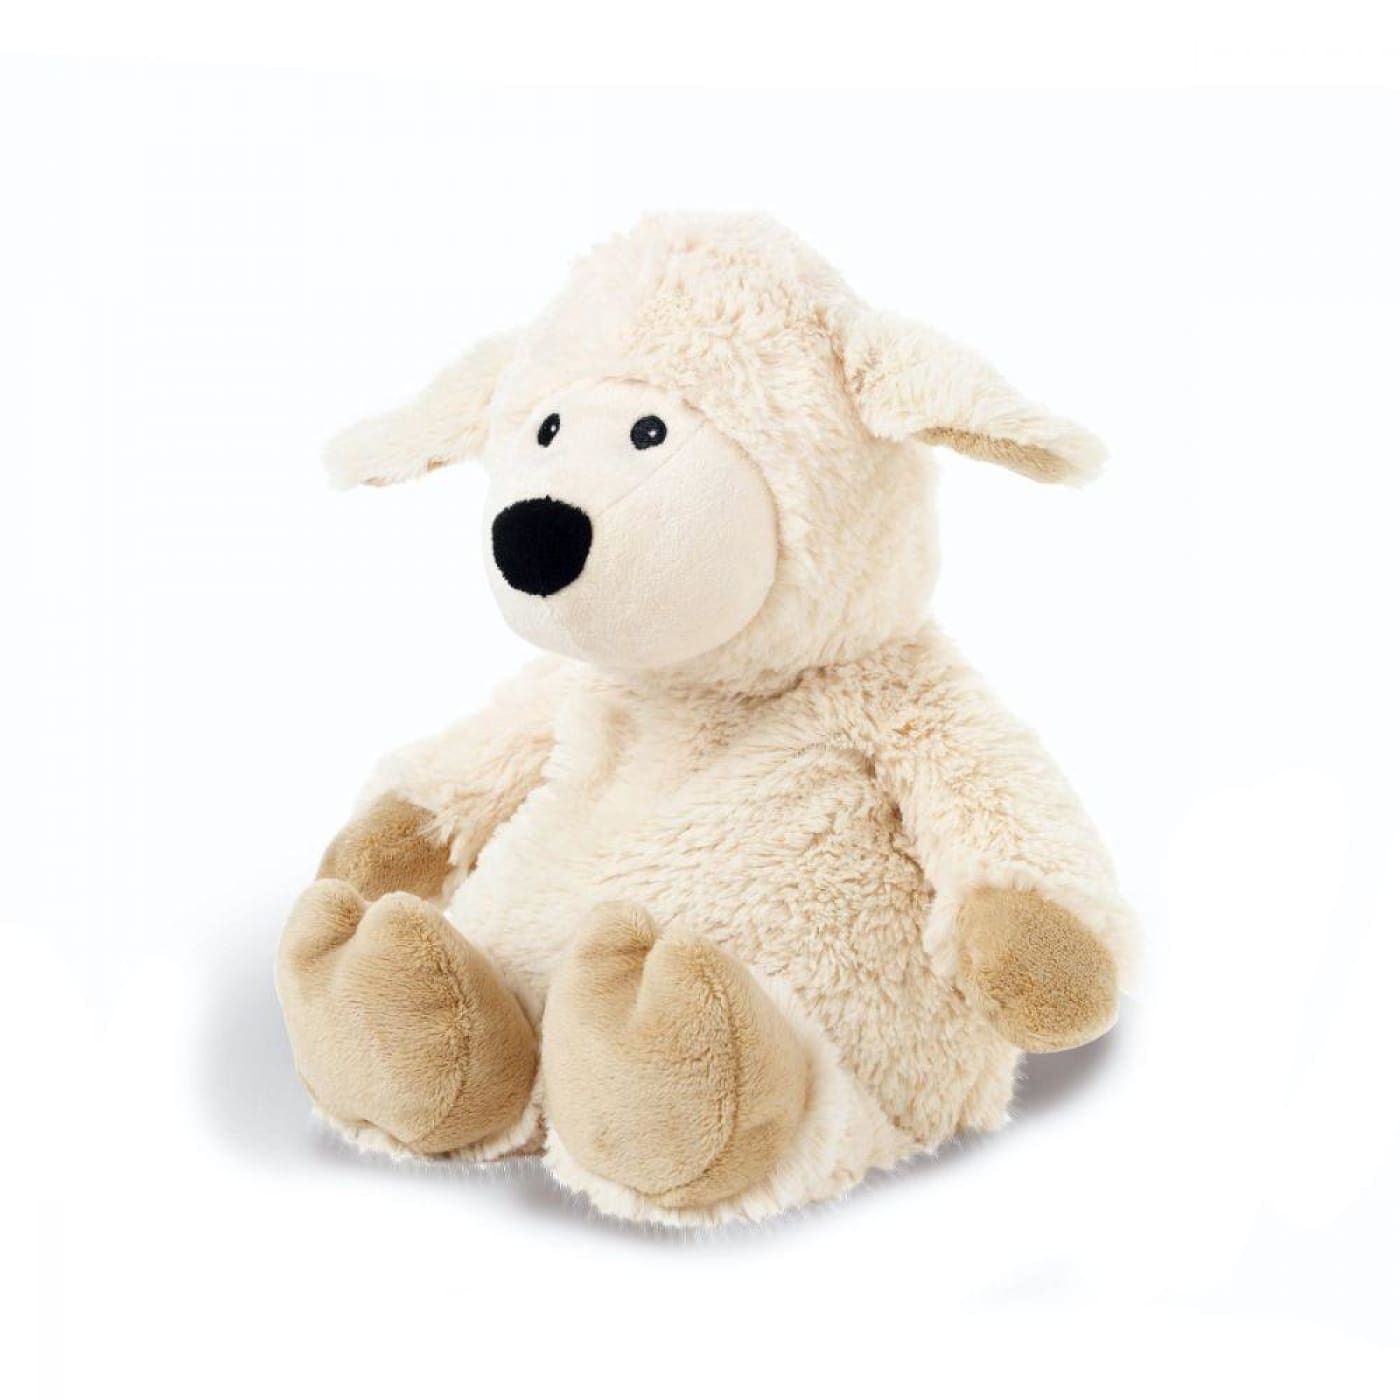 Warmies Cozy Plush - Sheep - Sheep - HEALTH & HOME SAFETY - THERMOMETERS/MEDICINAL